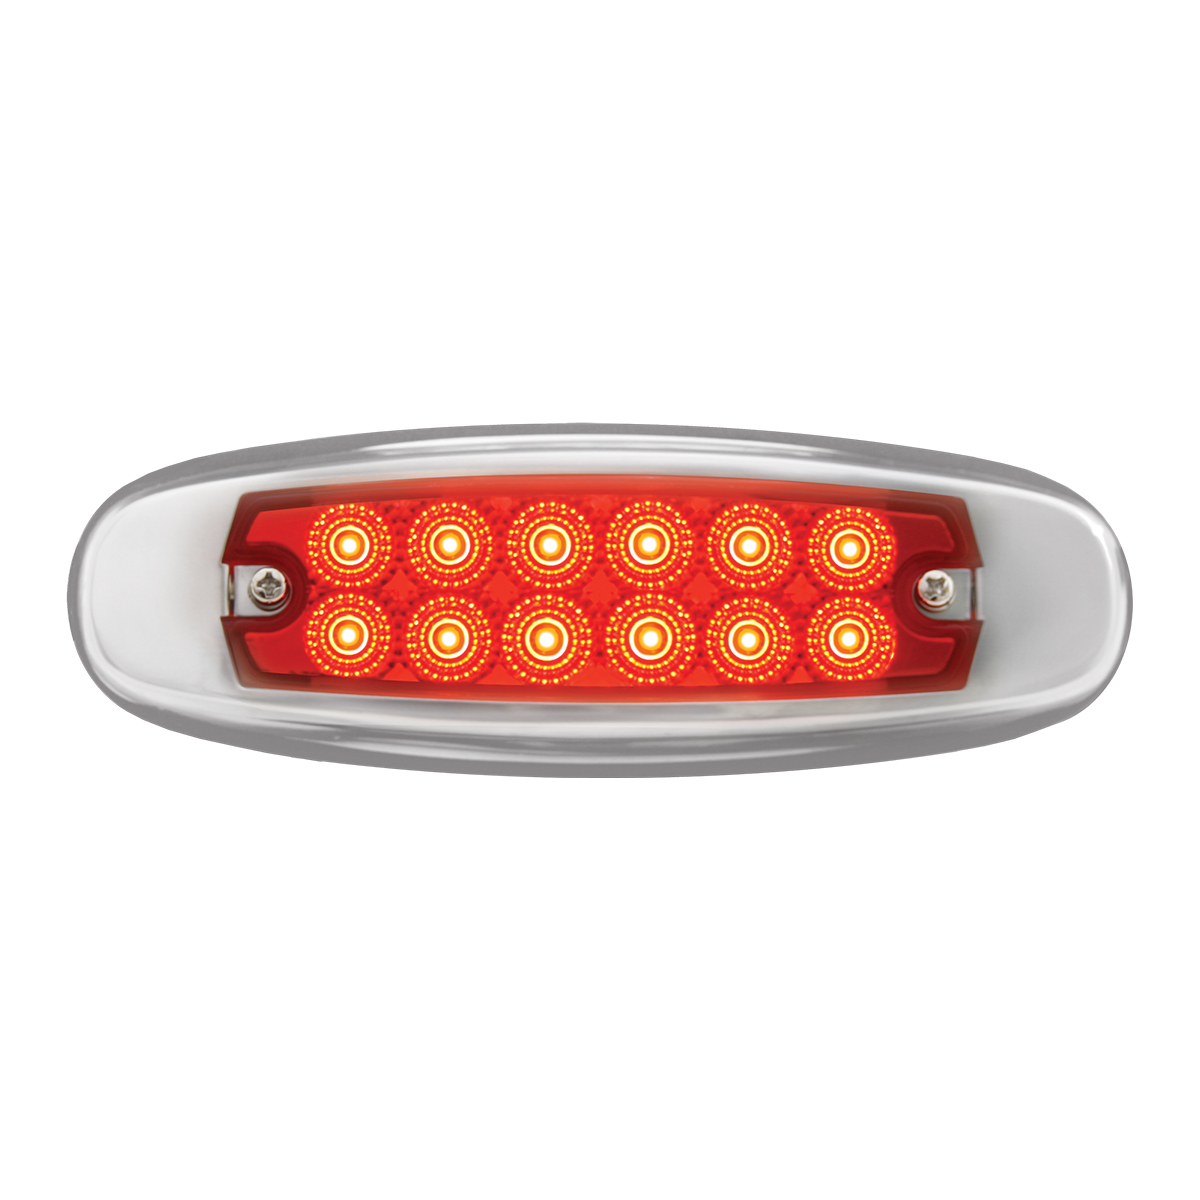 Ultra Thin Spyder 12 LED Marker Clearance Light Chrome Bezel Dual Function - Red